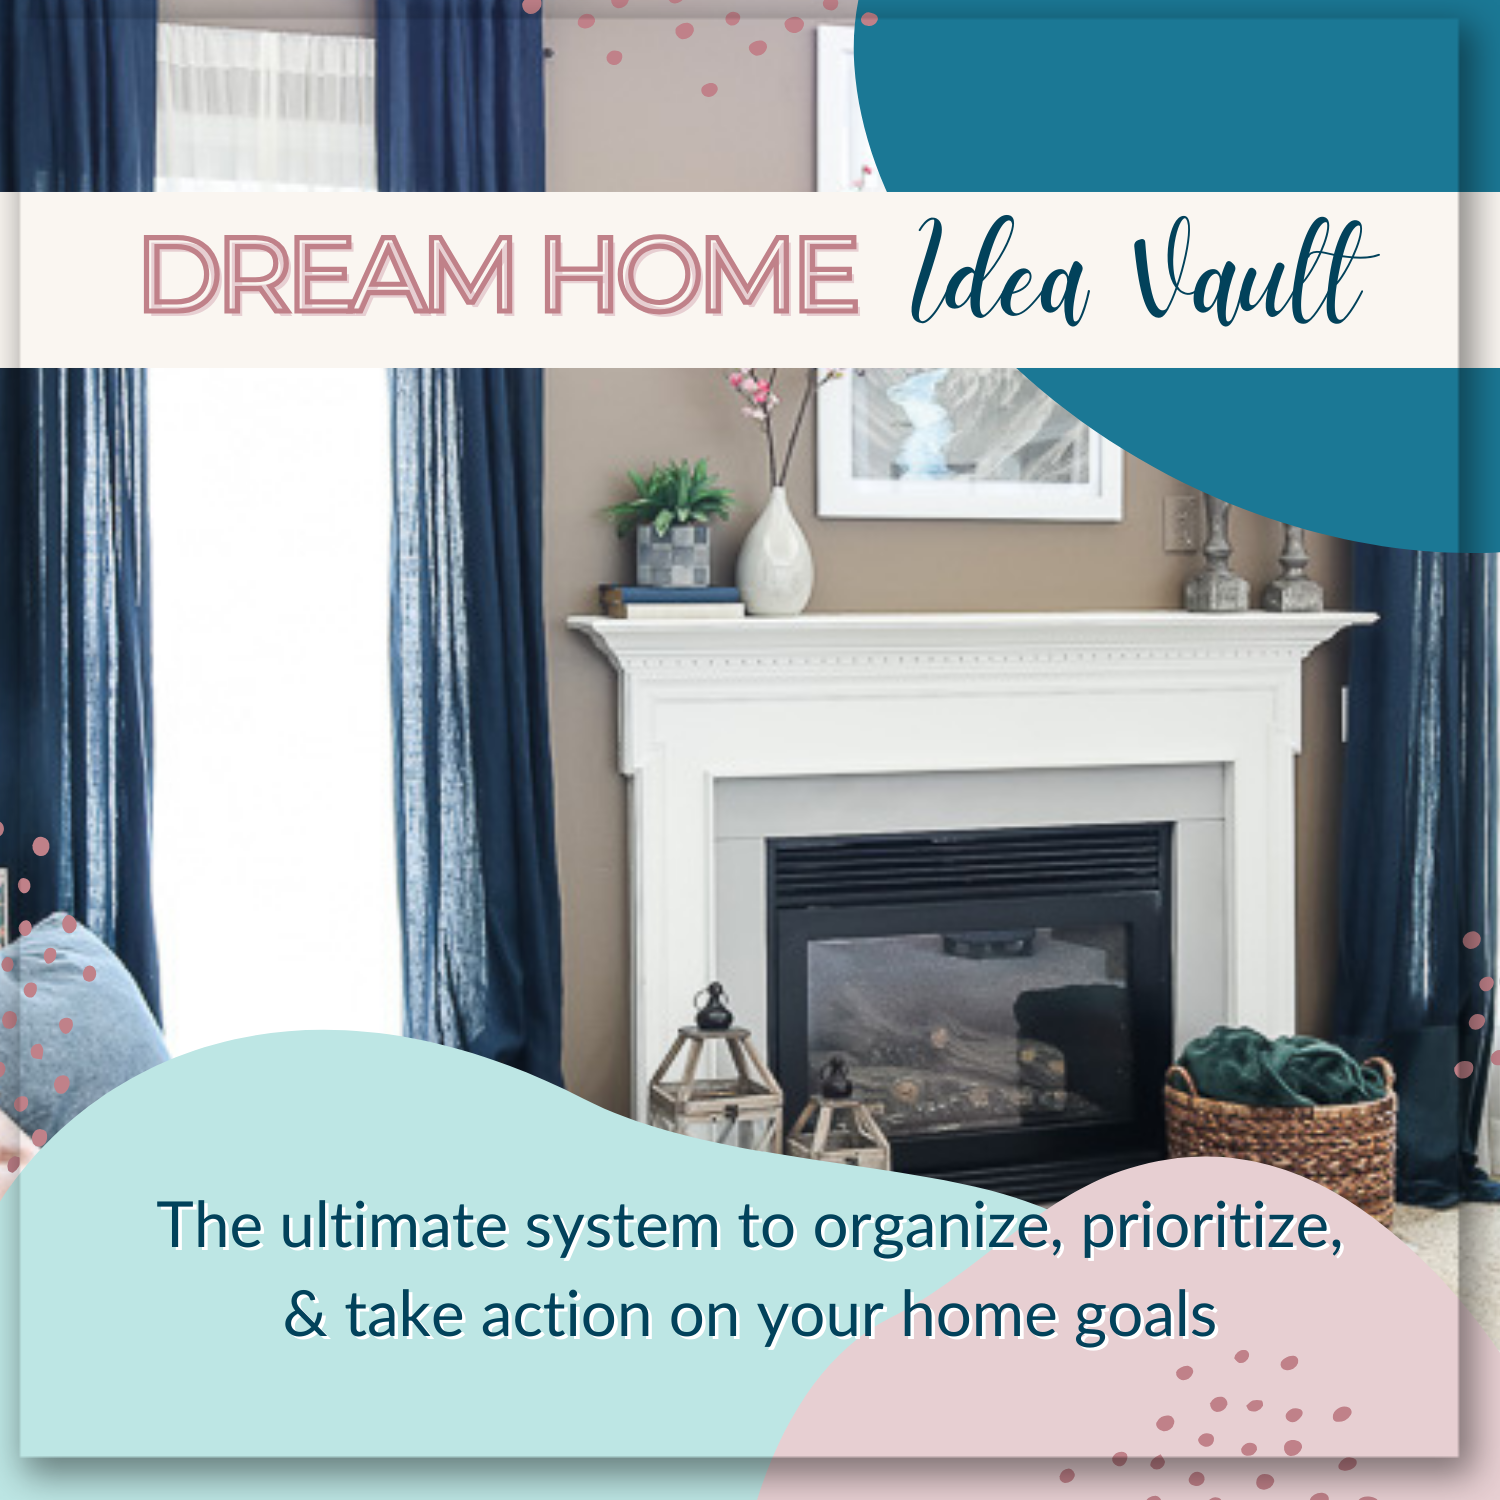 Transform your My Homier Home Dream Home Idea Vault Workshop with the ultimate vault system to stay organized and take action on your goals.